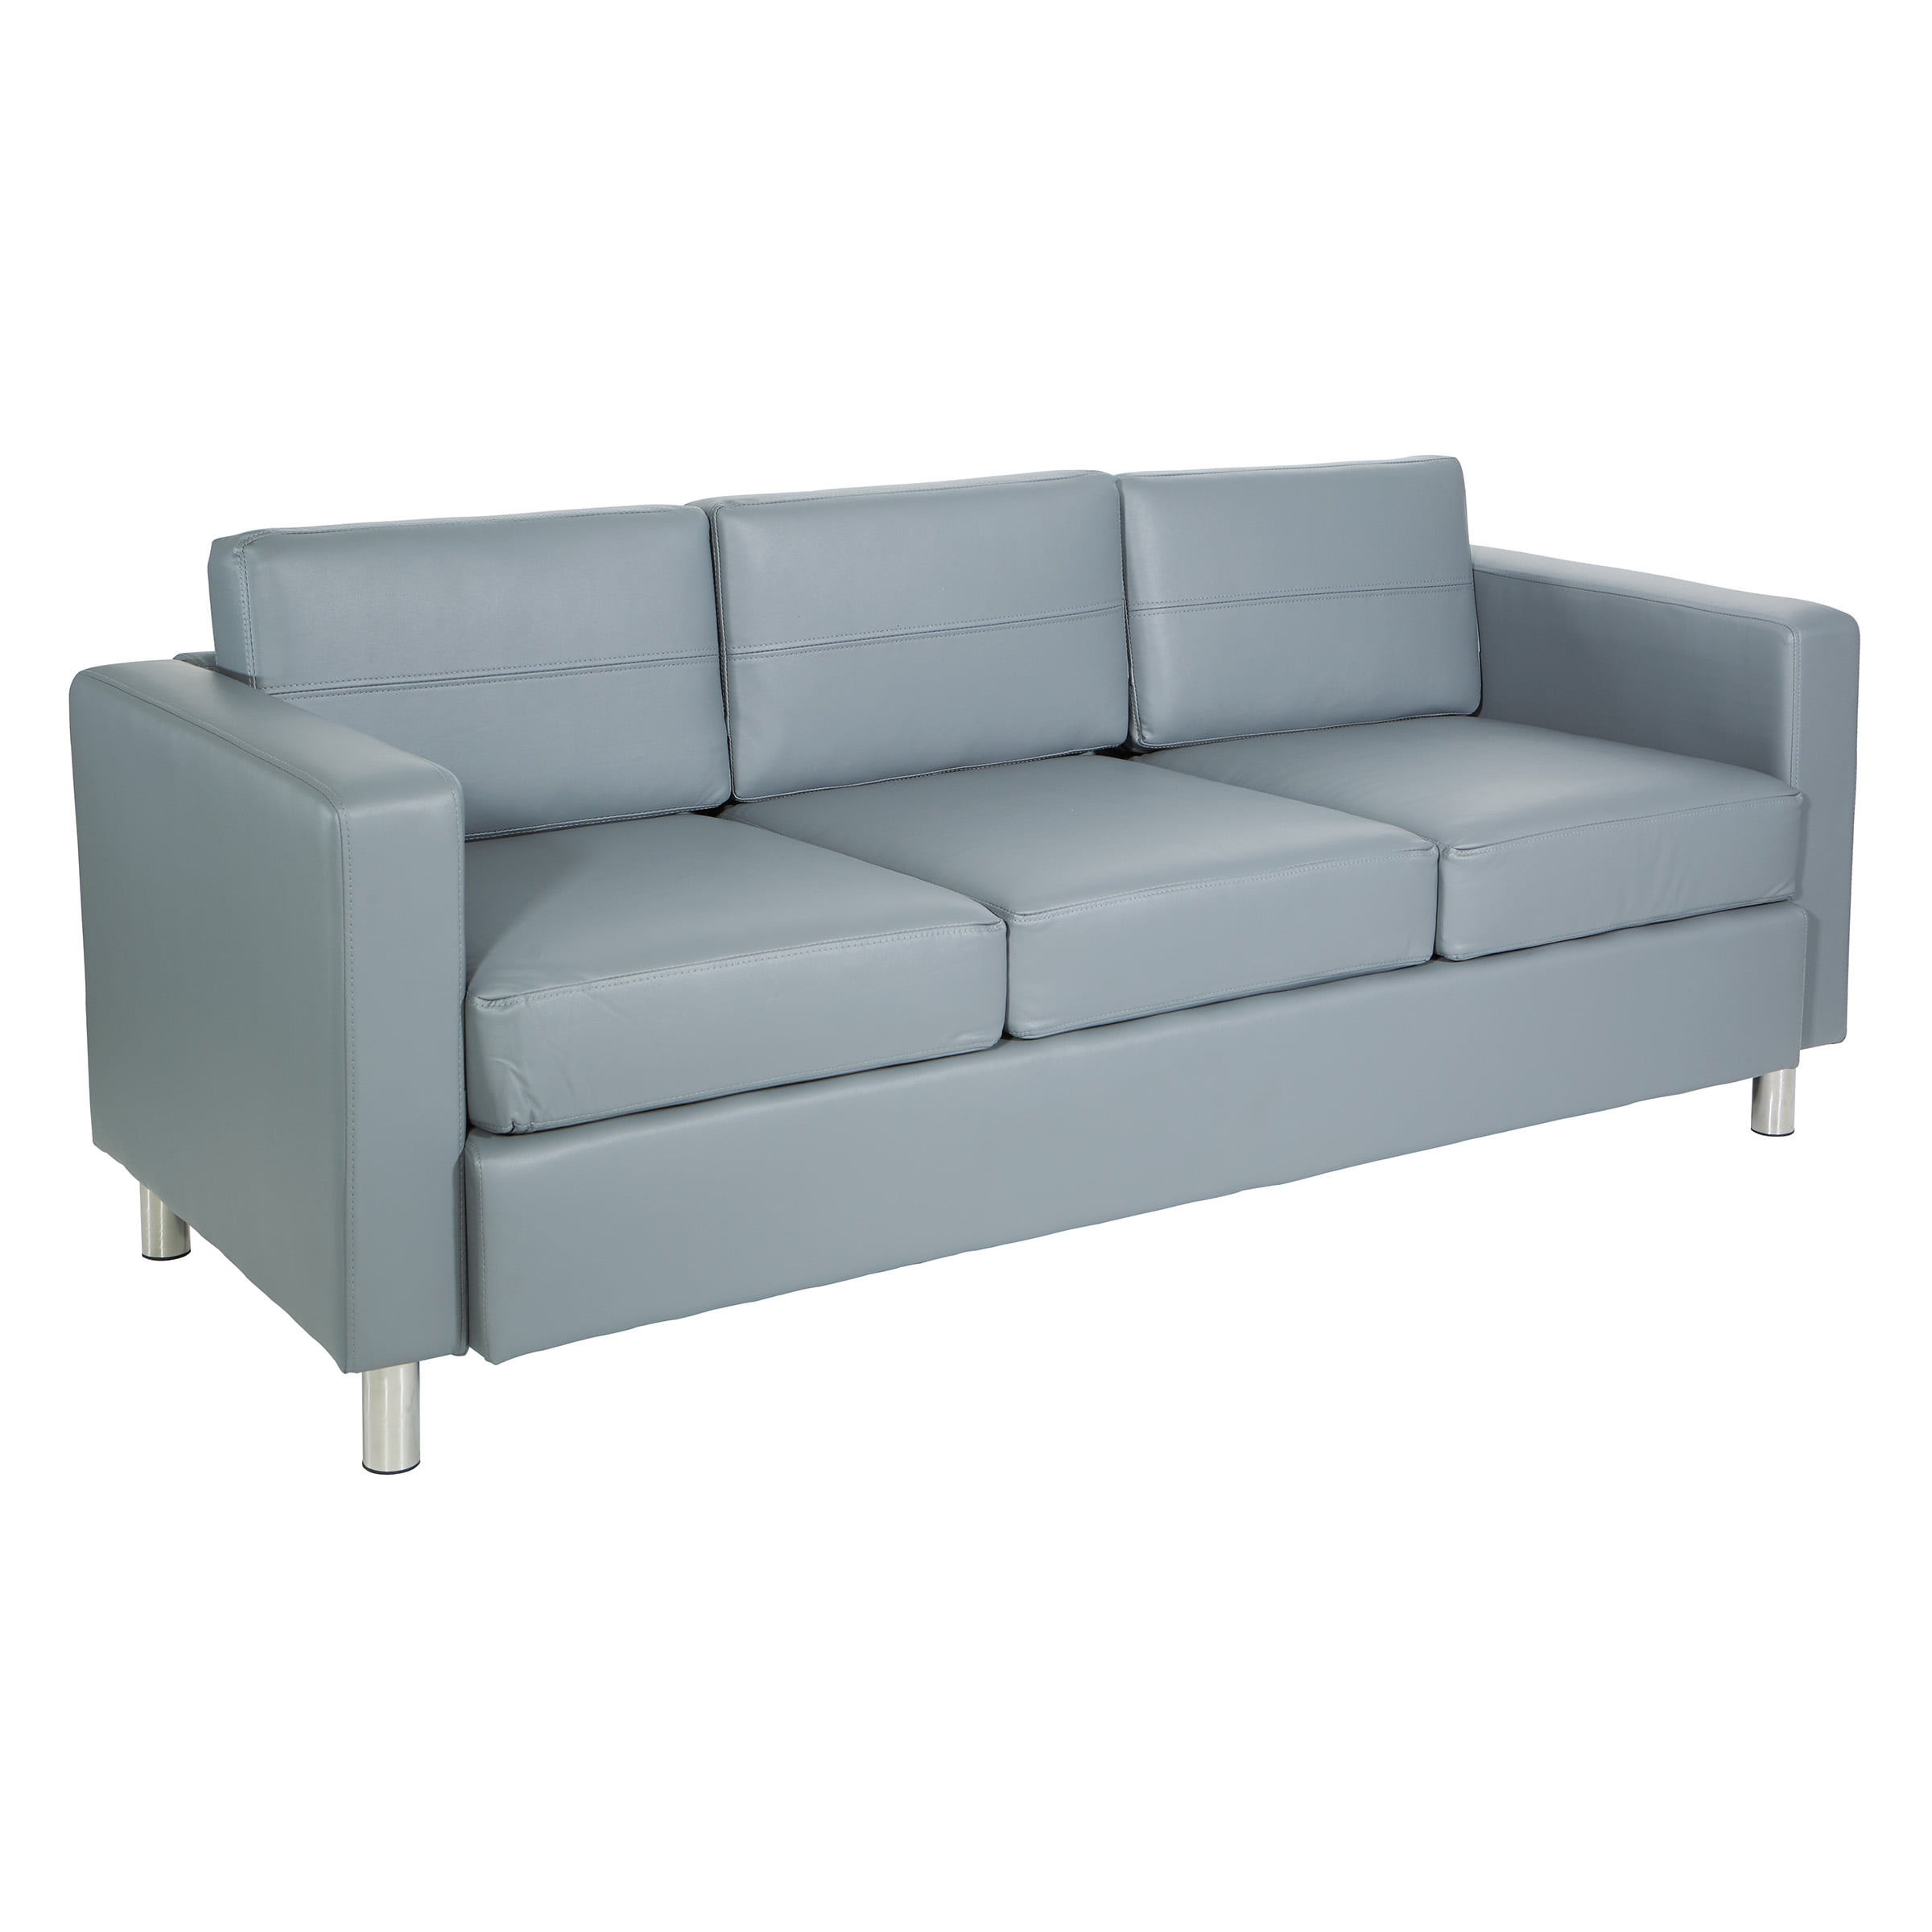 OSP Home Furnishings Pacific in Spring Silver and Color Grey Leather Legs Couch Faux Charcoal with Seats Box Sofa